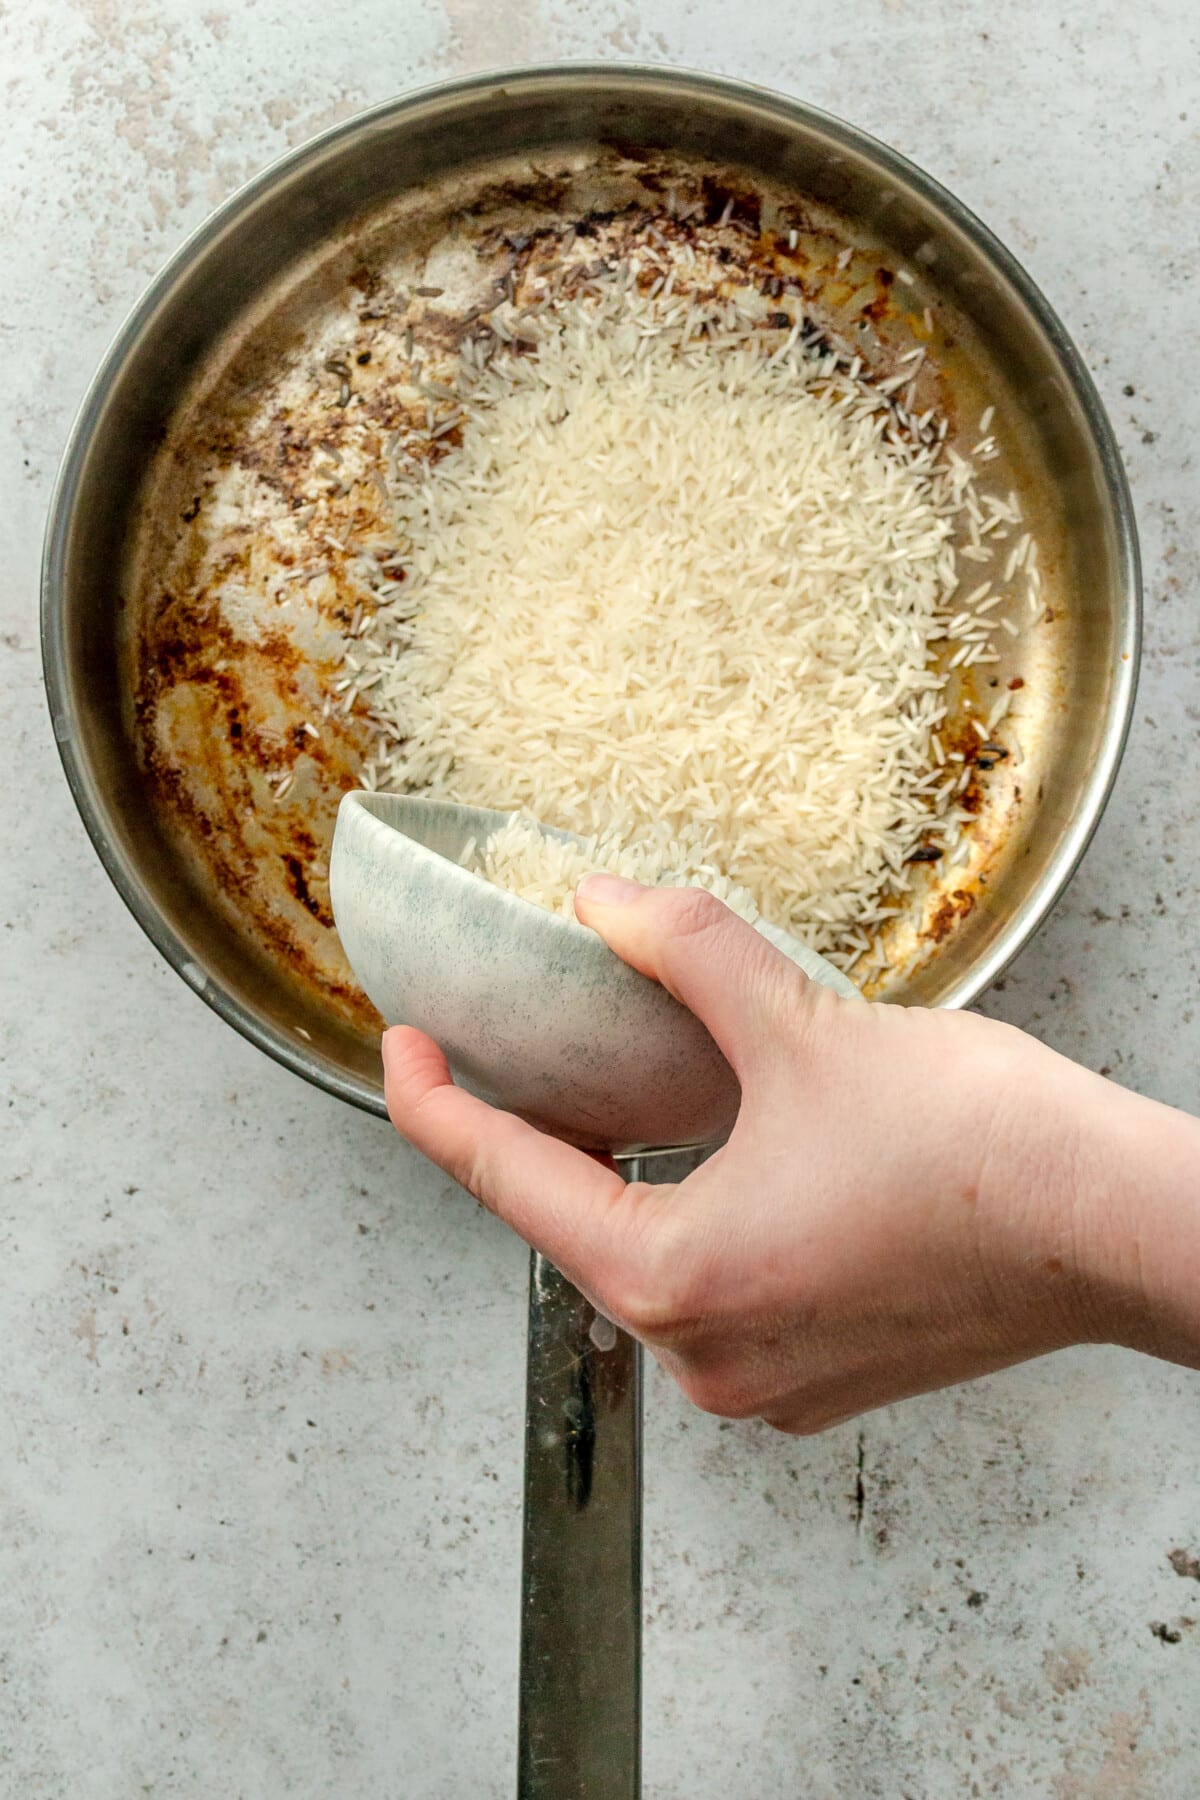 Rice is tossed into a stainless steel frying pan on a light grey surface.